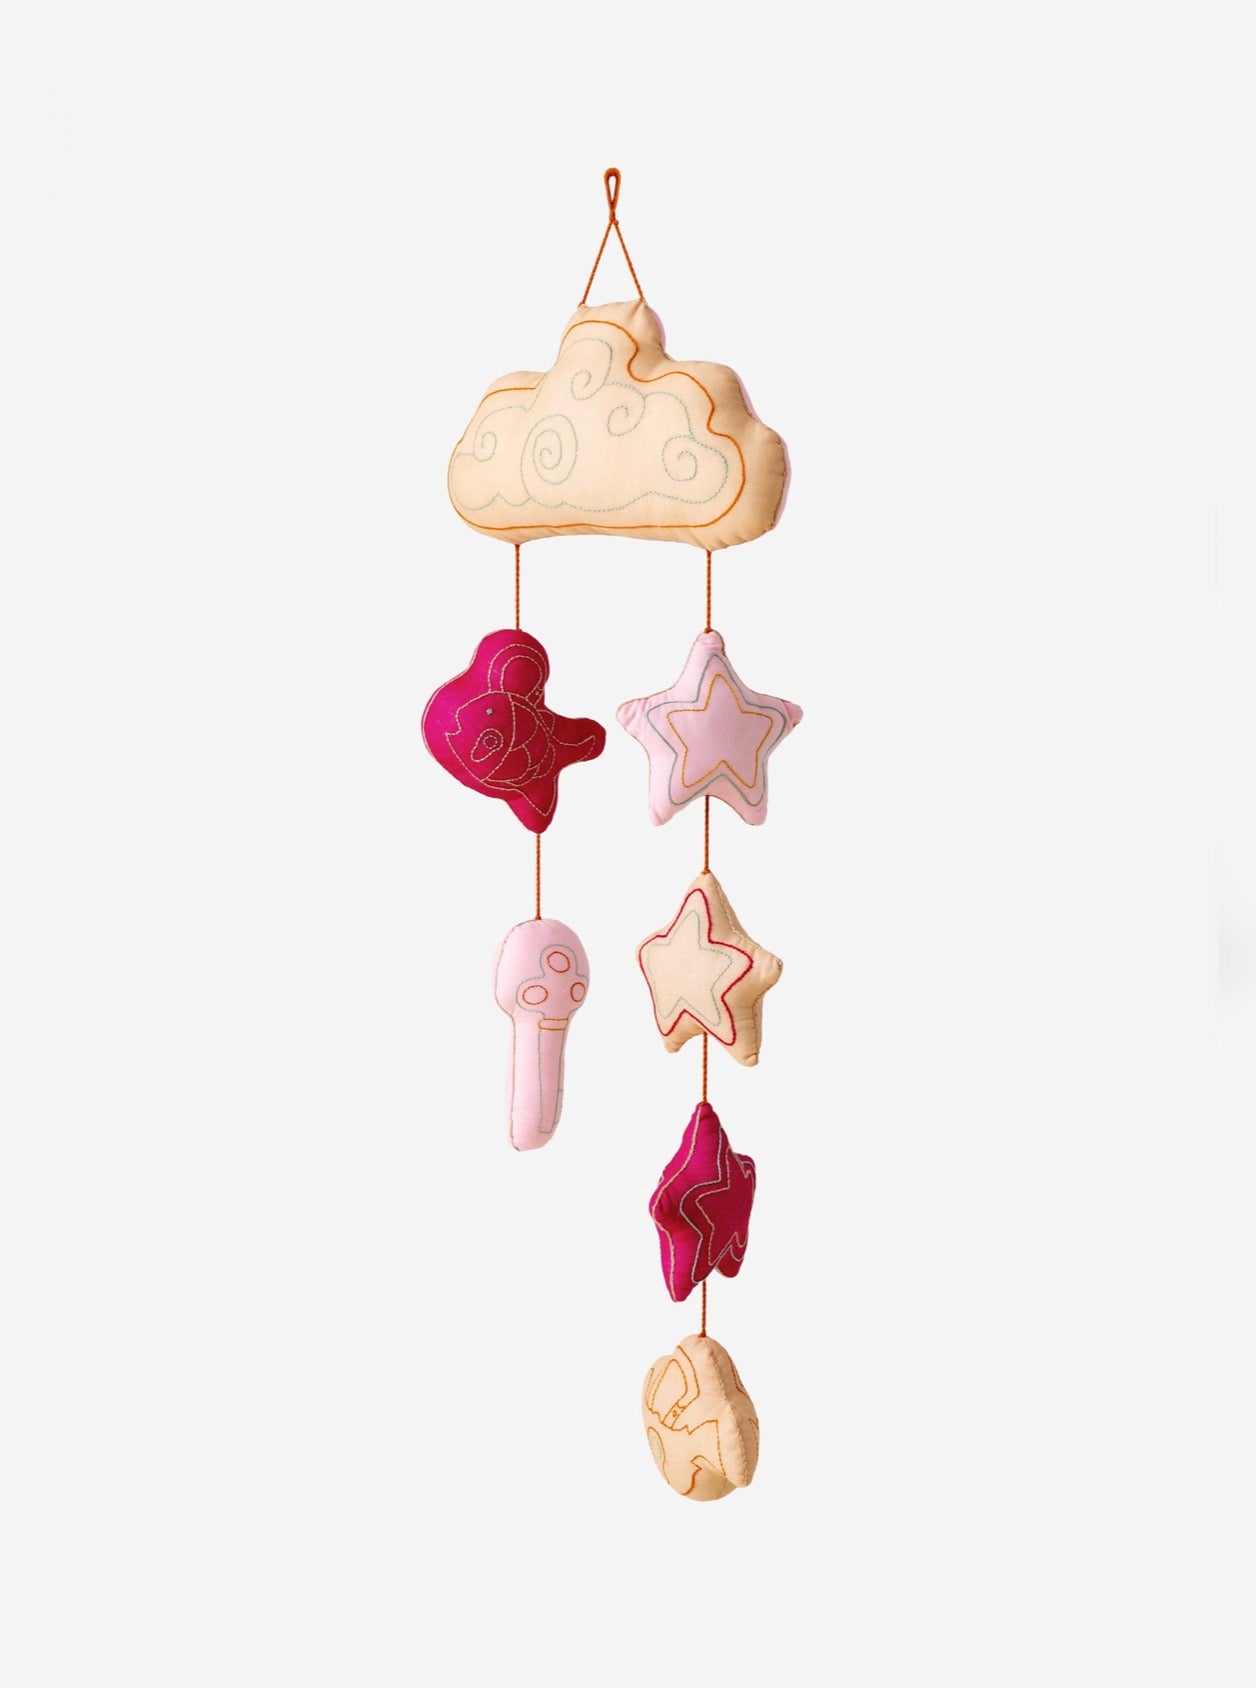 Wheat Lucky Charm baby mobile hanging from ceiling